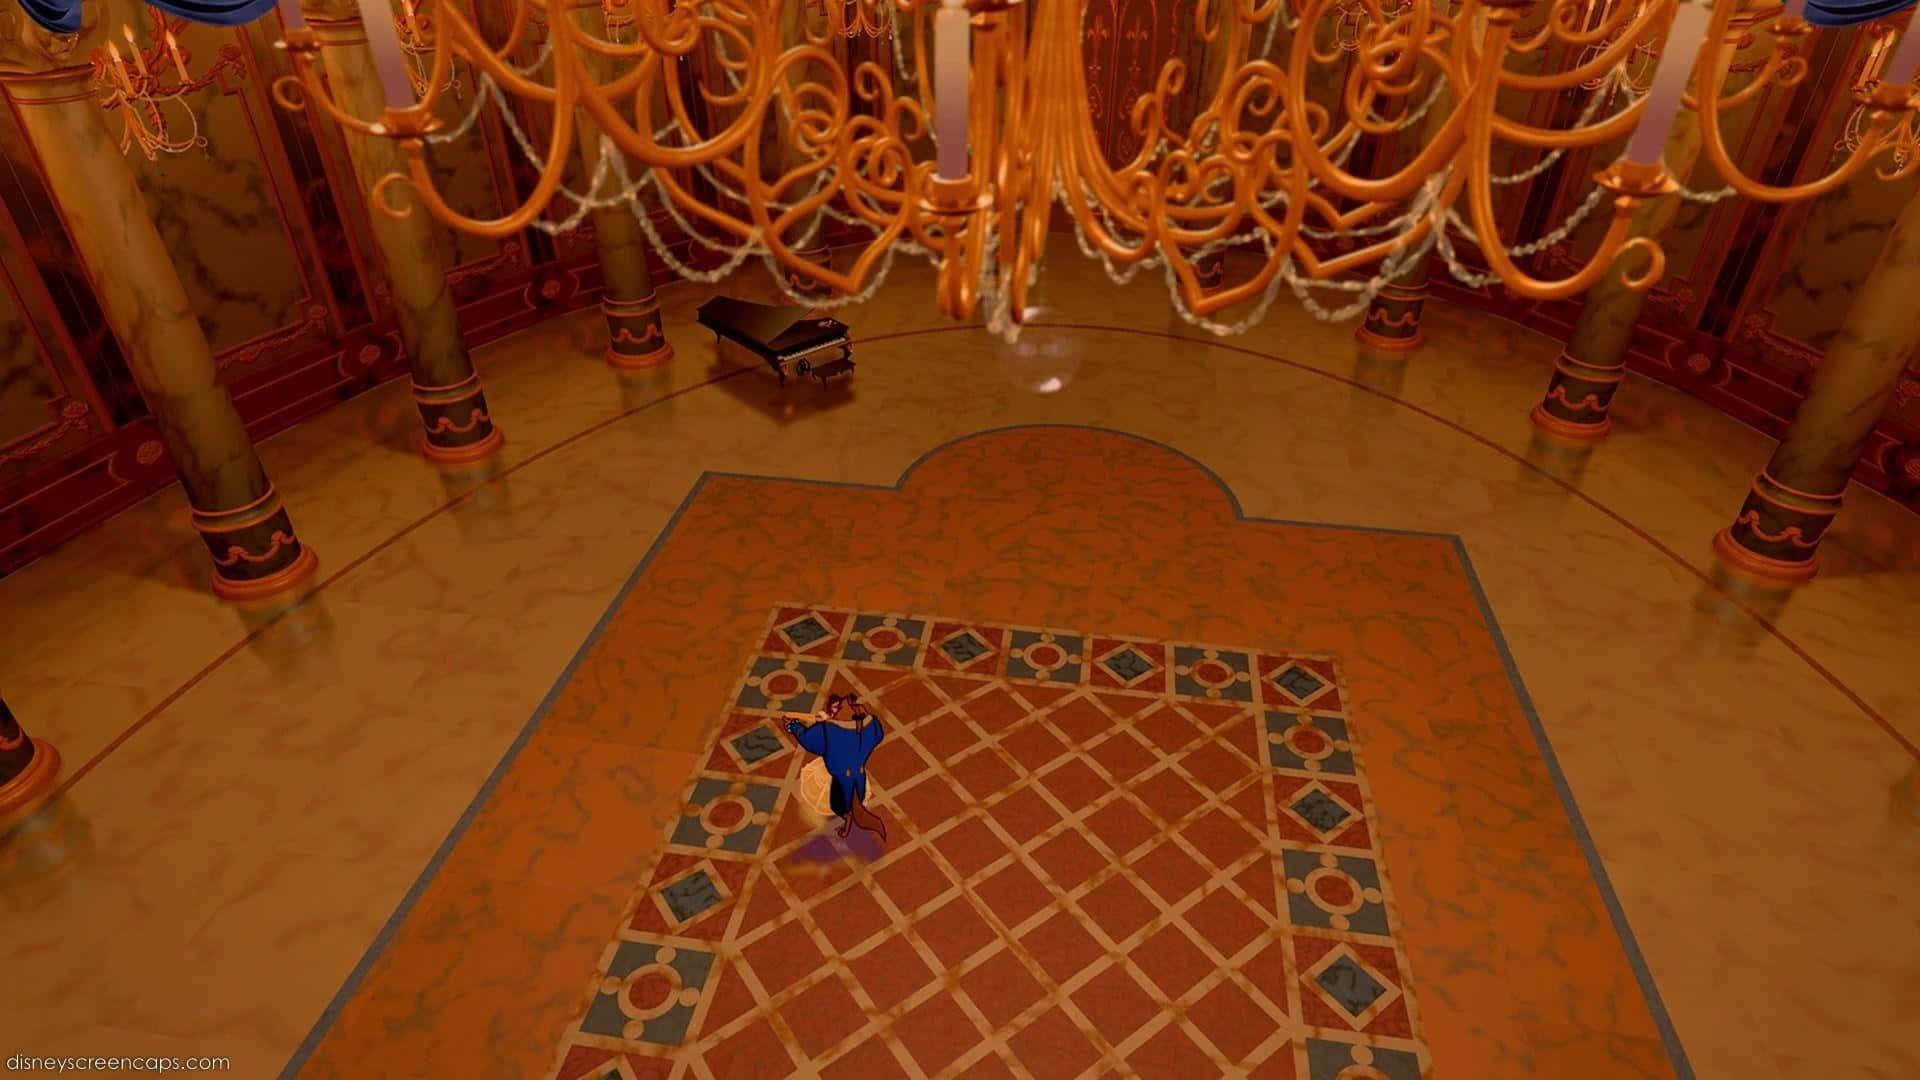 A Video Game Screenshot Of A Large Room With A Chandelier